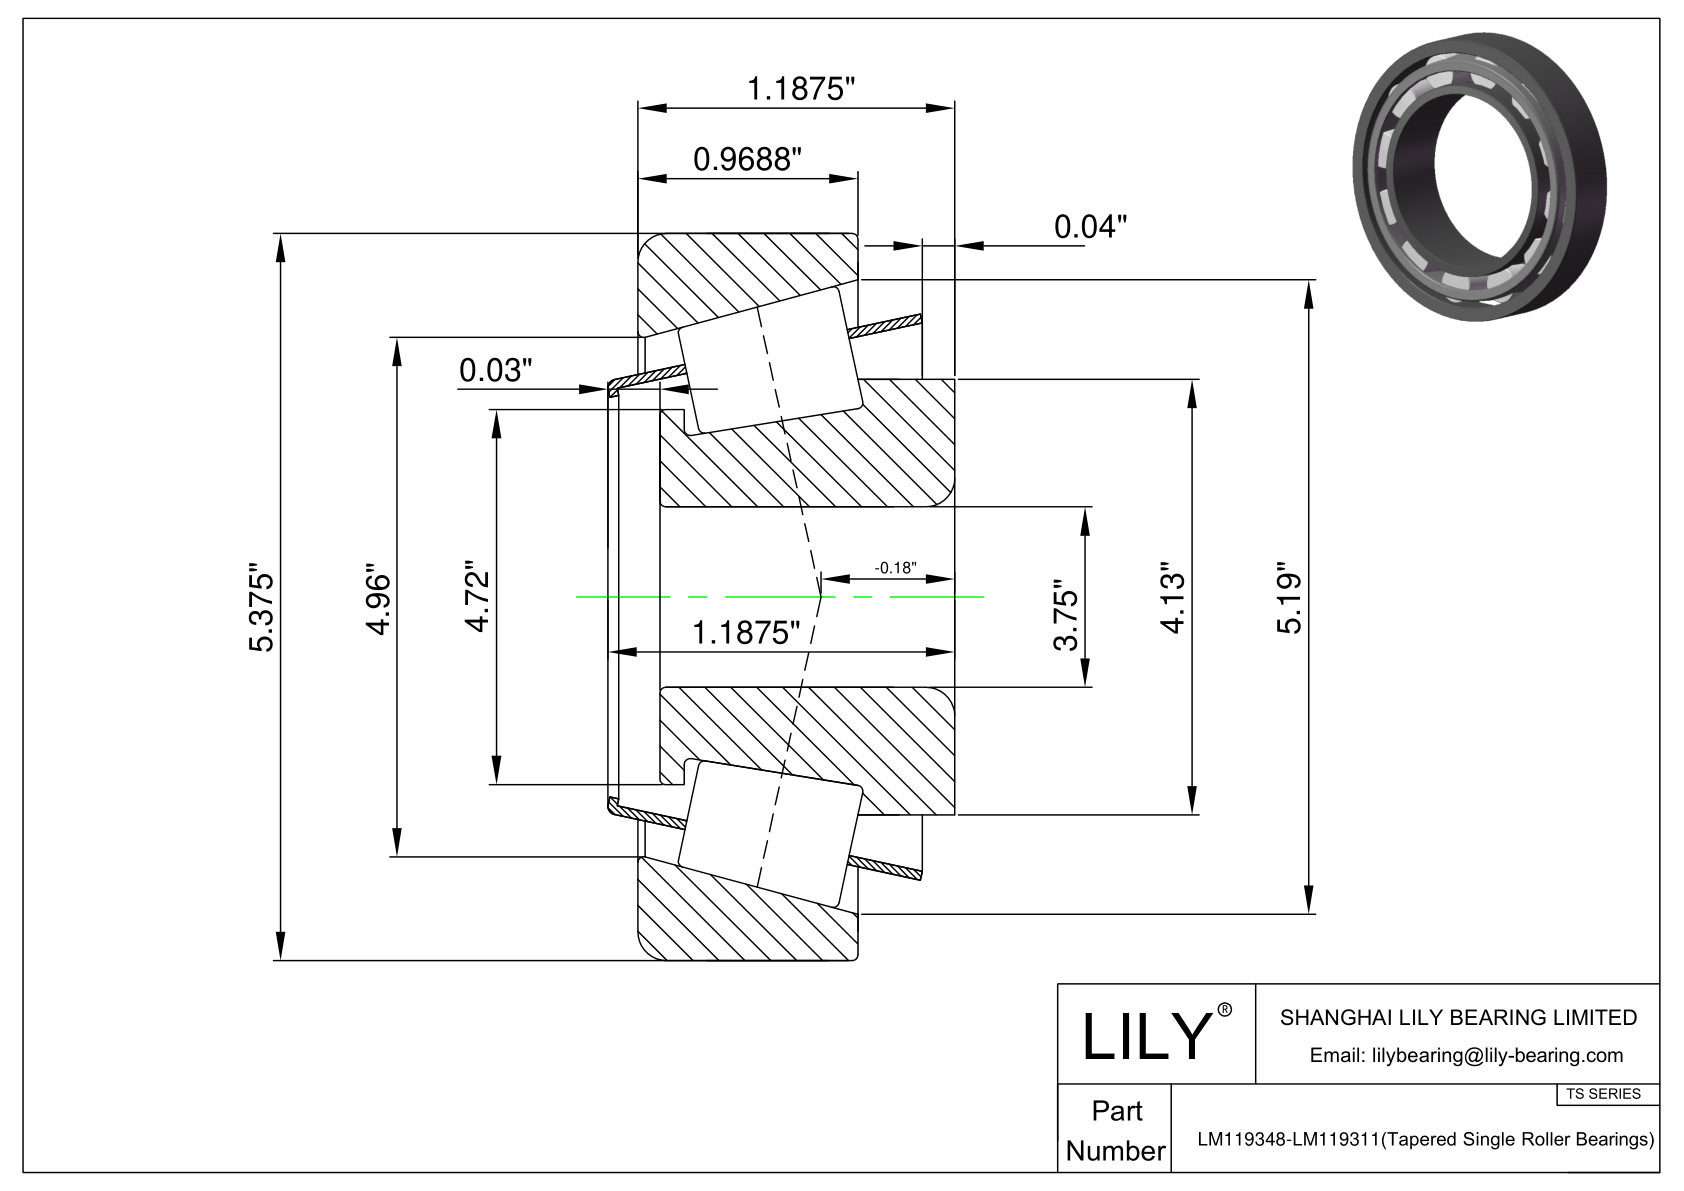 LM119348-LM119311 TS (Tapered Single Roller Bearings) (Imperial) cad drawing